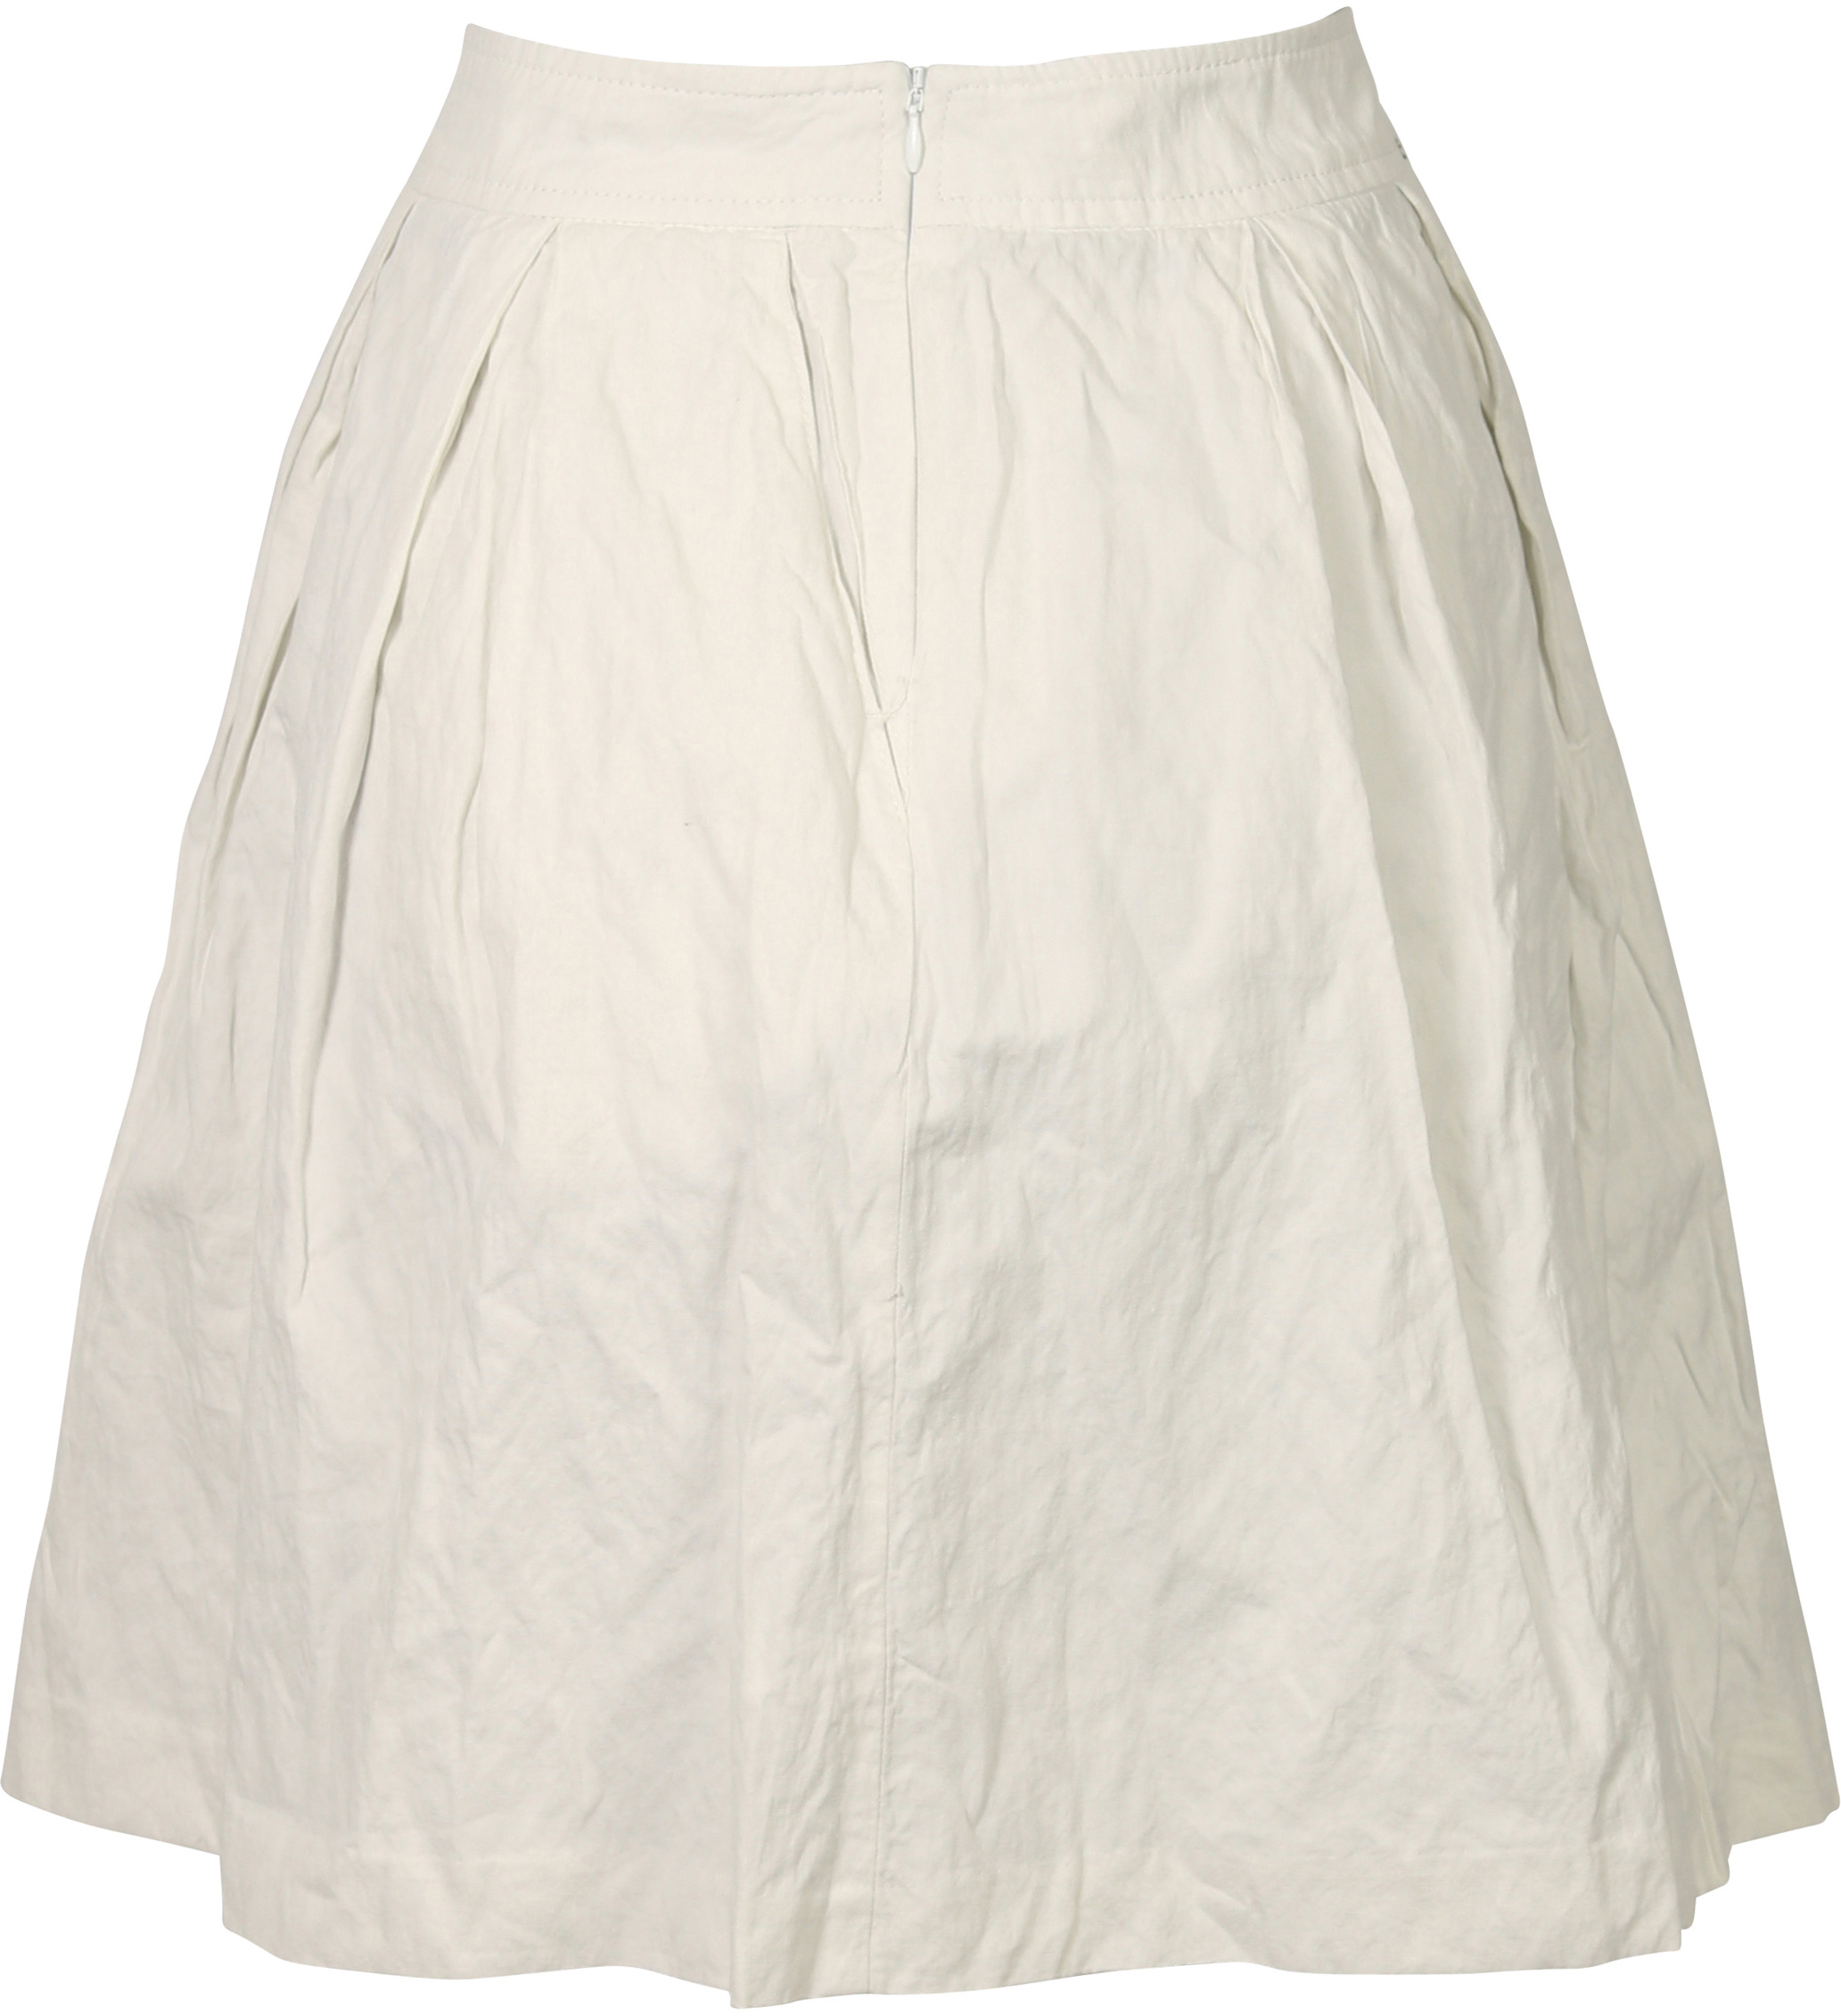 Hannes Roether Skirt Offwhite L